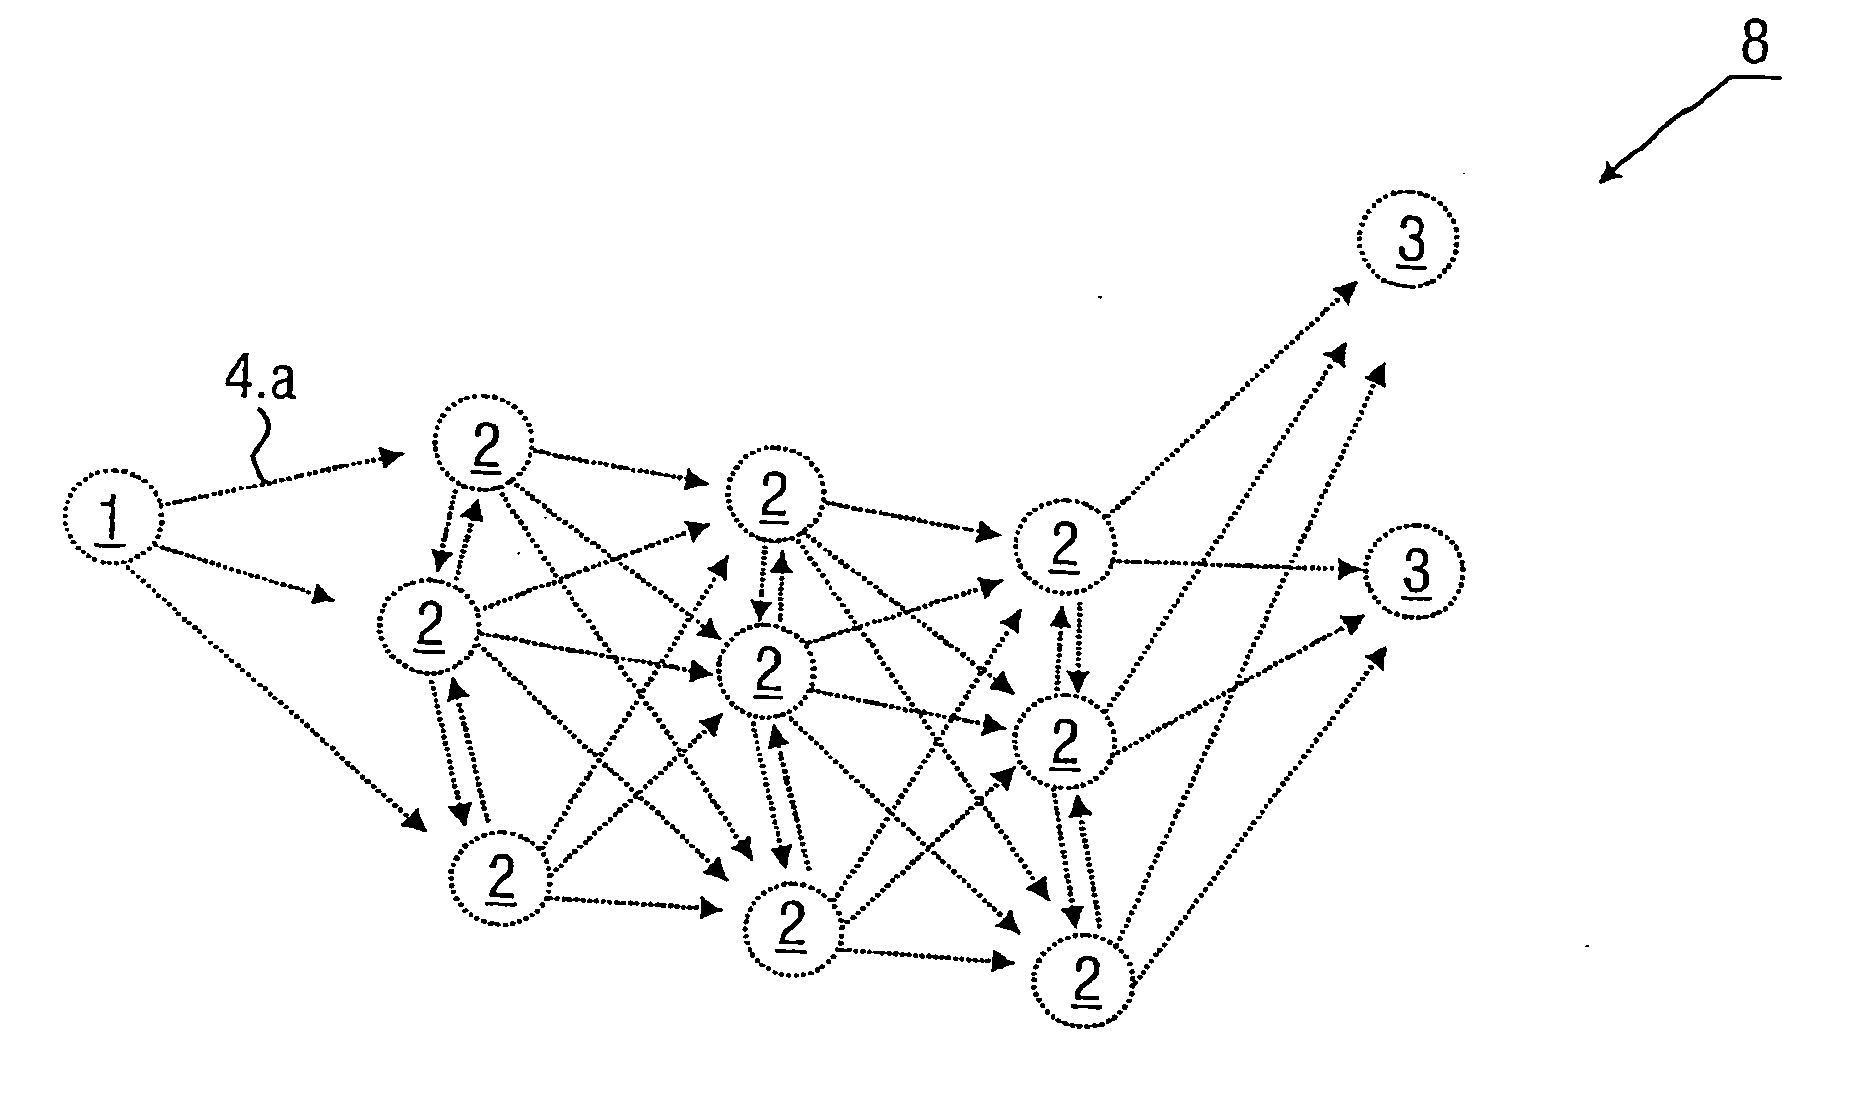 Method for establishing a connection between a service requester (client) and a service provider (server) in a decentralized mobile wireless network